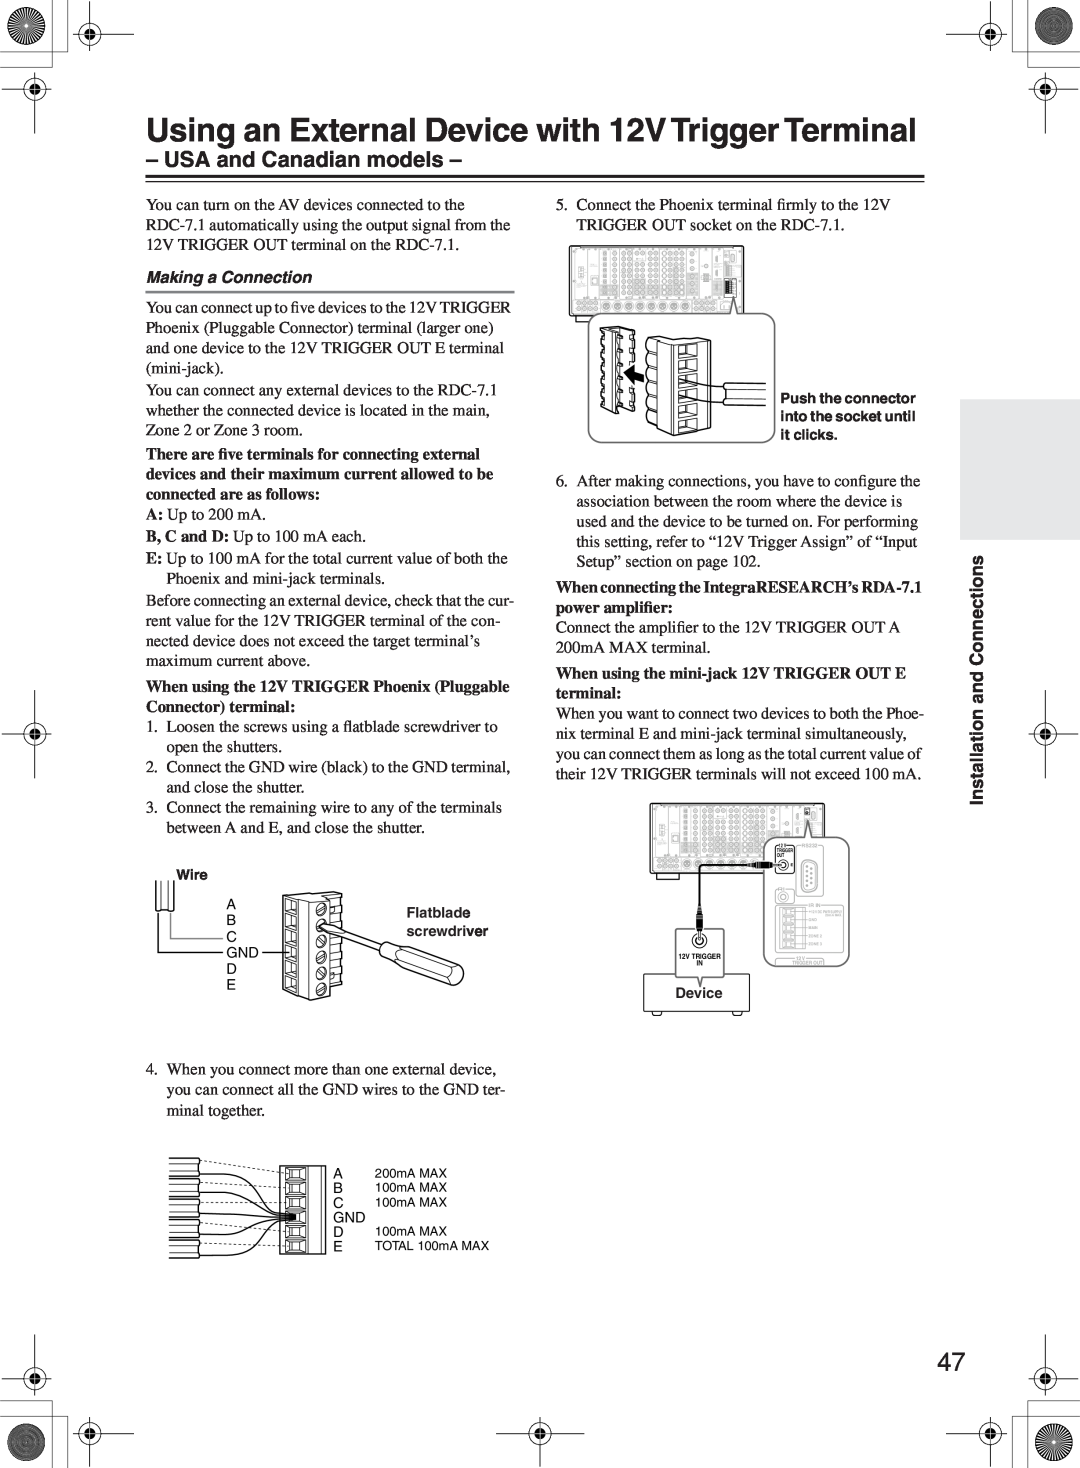 Integra RDC-7.1 instruction manual USA and Canadian models, Making a Connection, Installation and Connections 